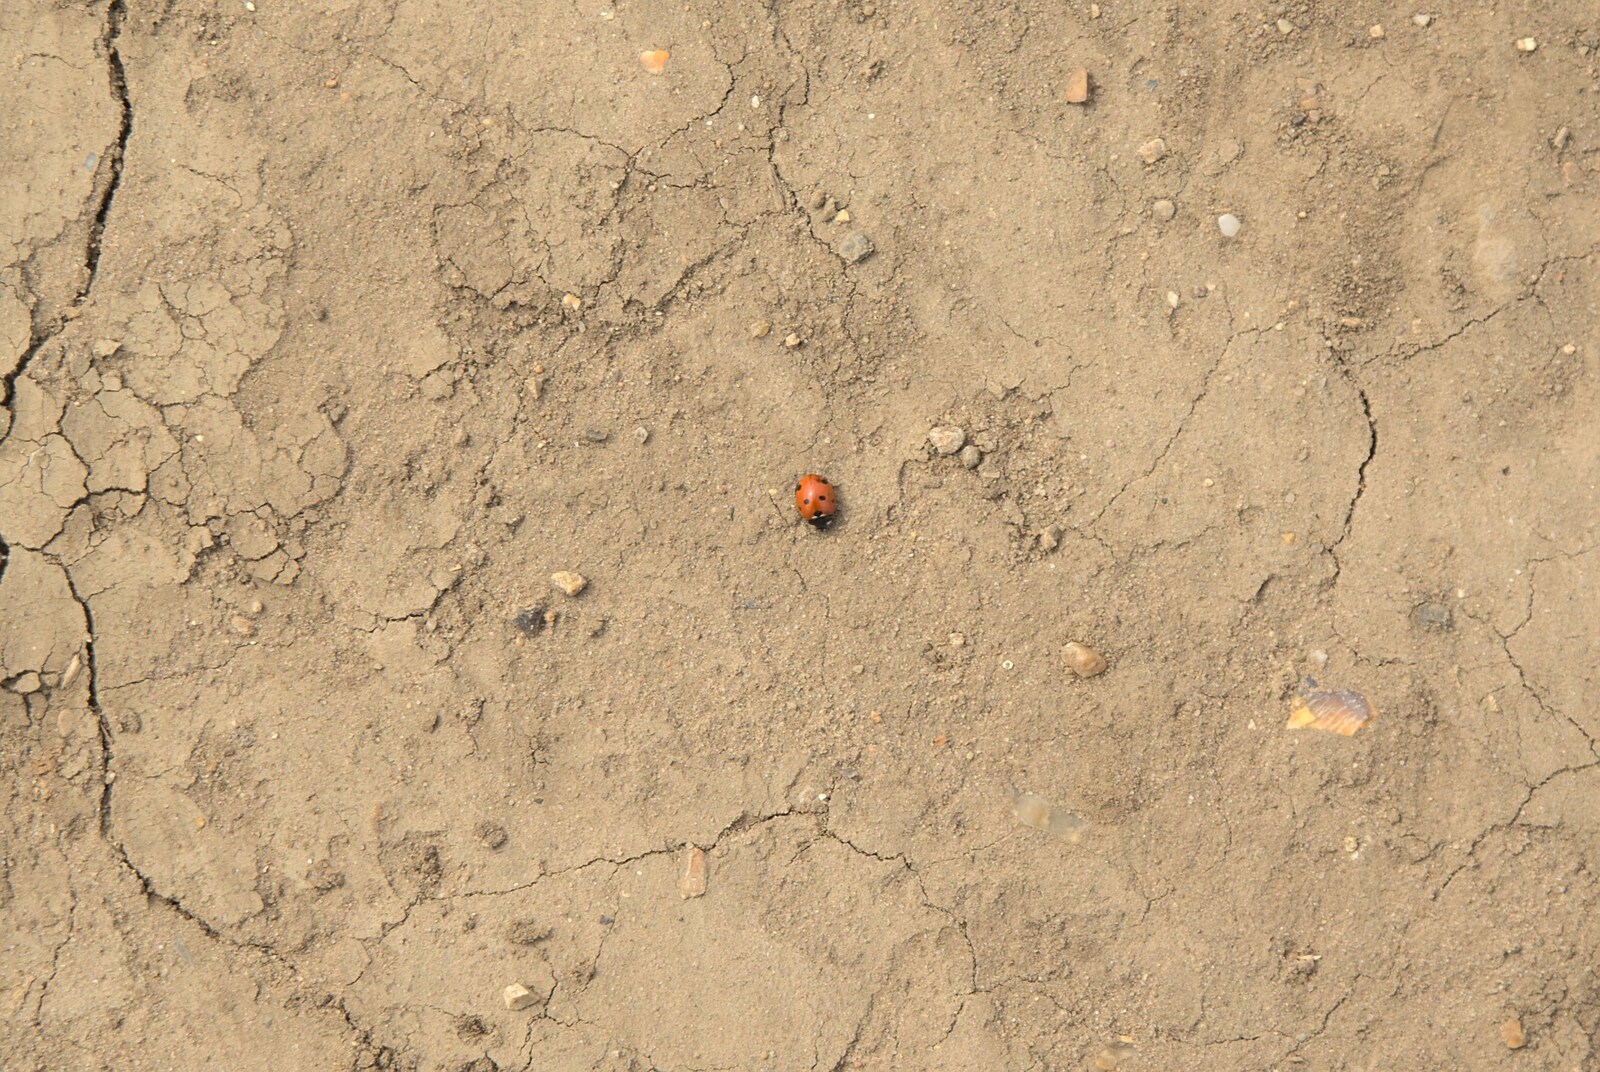 A lone ladybird roams the scorched earth from Emily and The Old Chap Visit, Brome, Suffolk - 29th August 2009